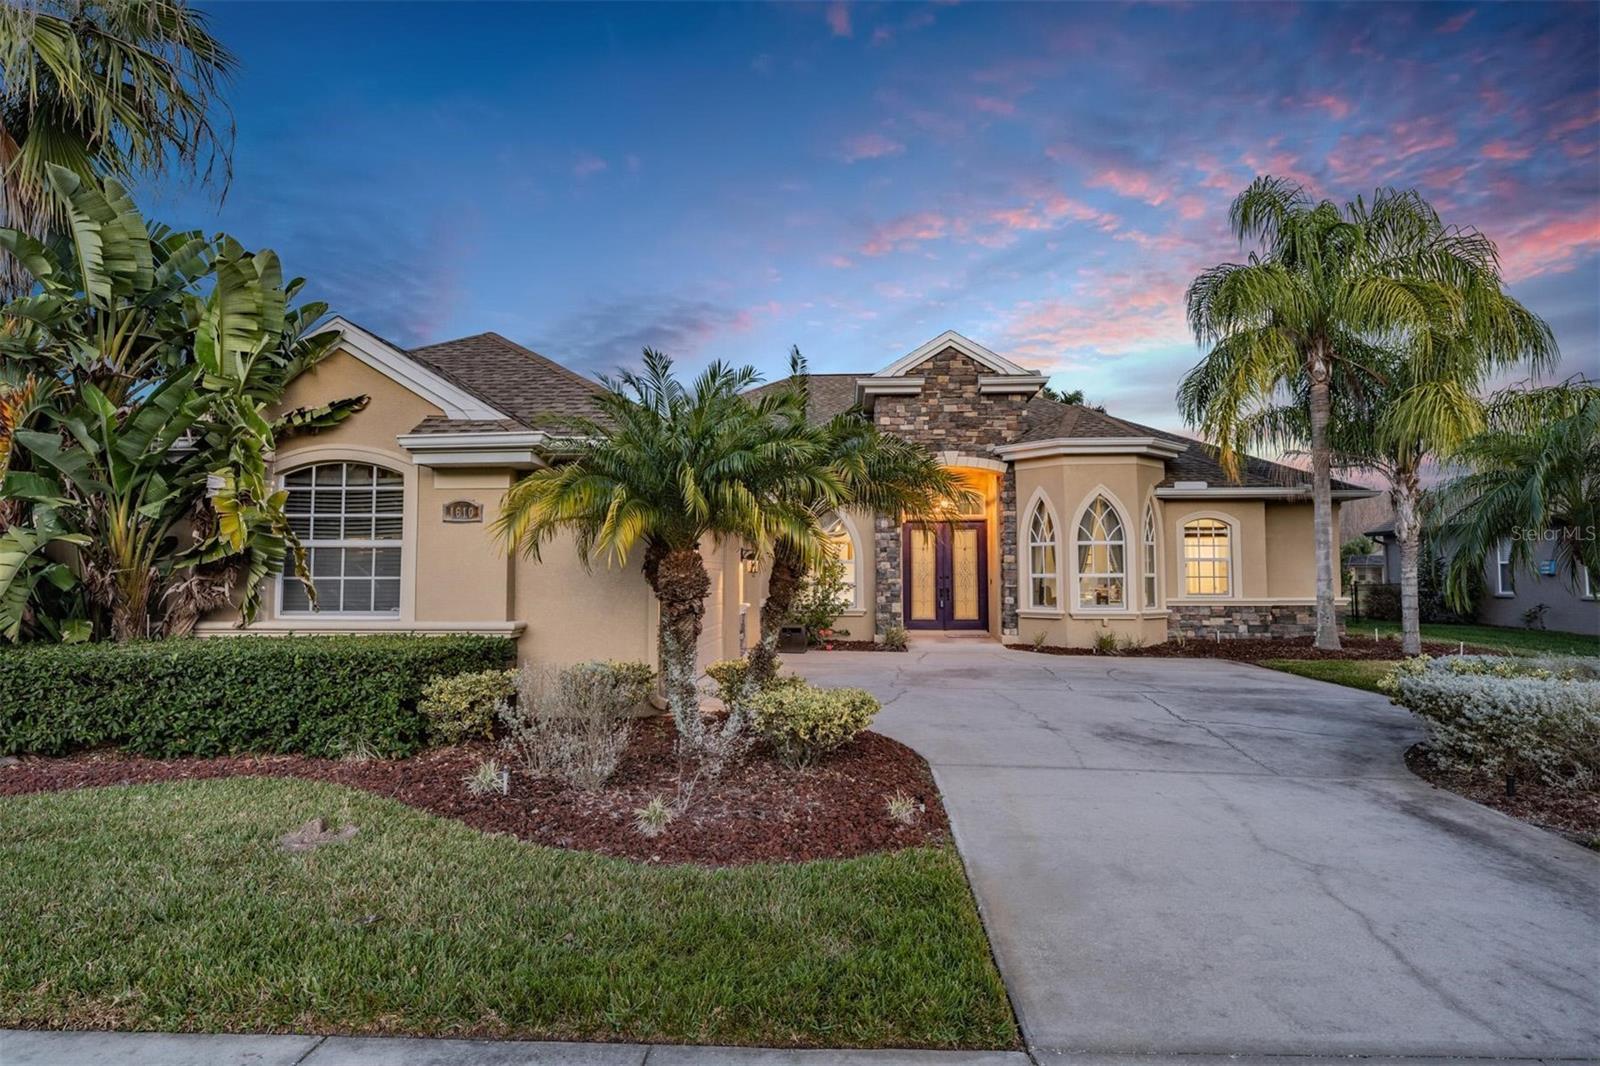 Details for 1610 Abyss Drive, ODESSA, FL 33556